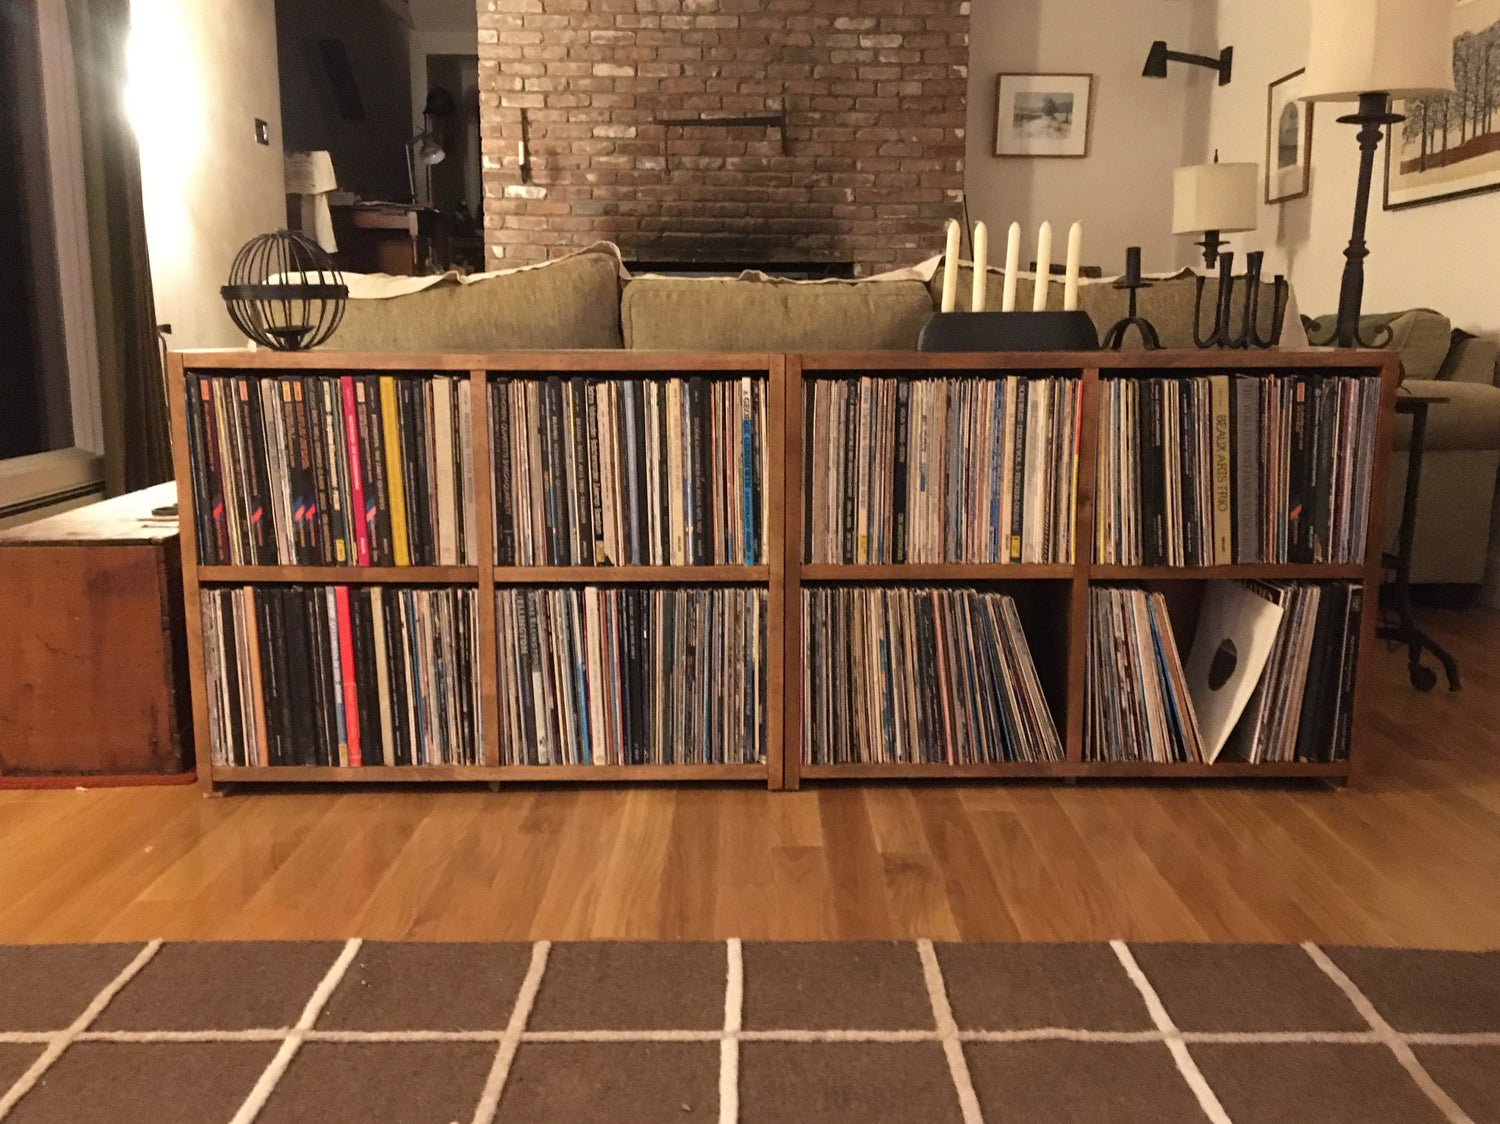 Two bookcases built in birch holding records and LPs finished in a light brown stain.